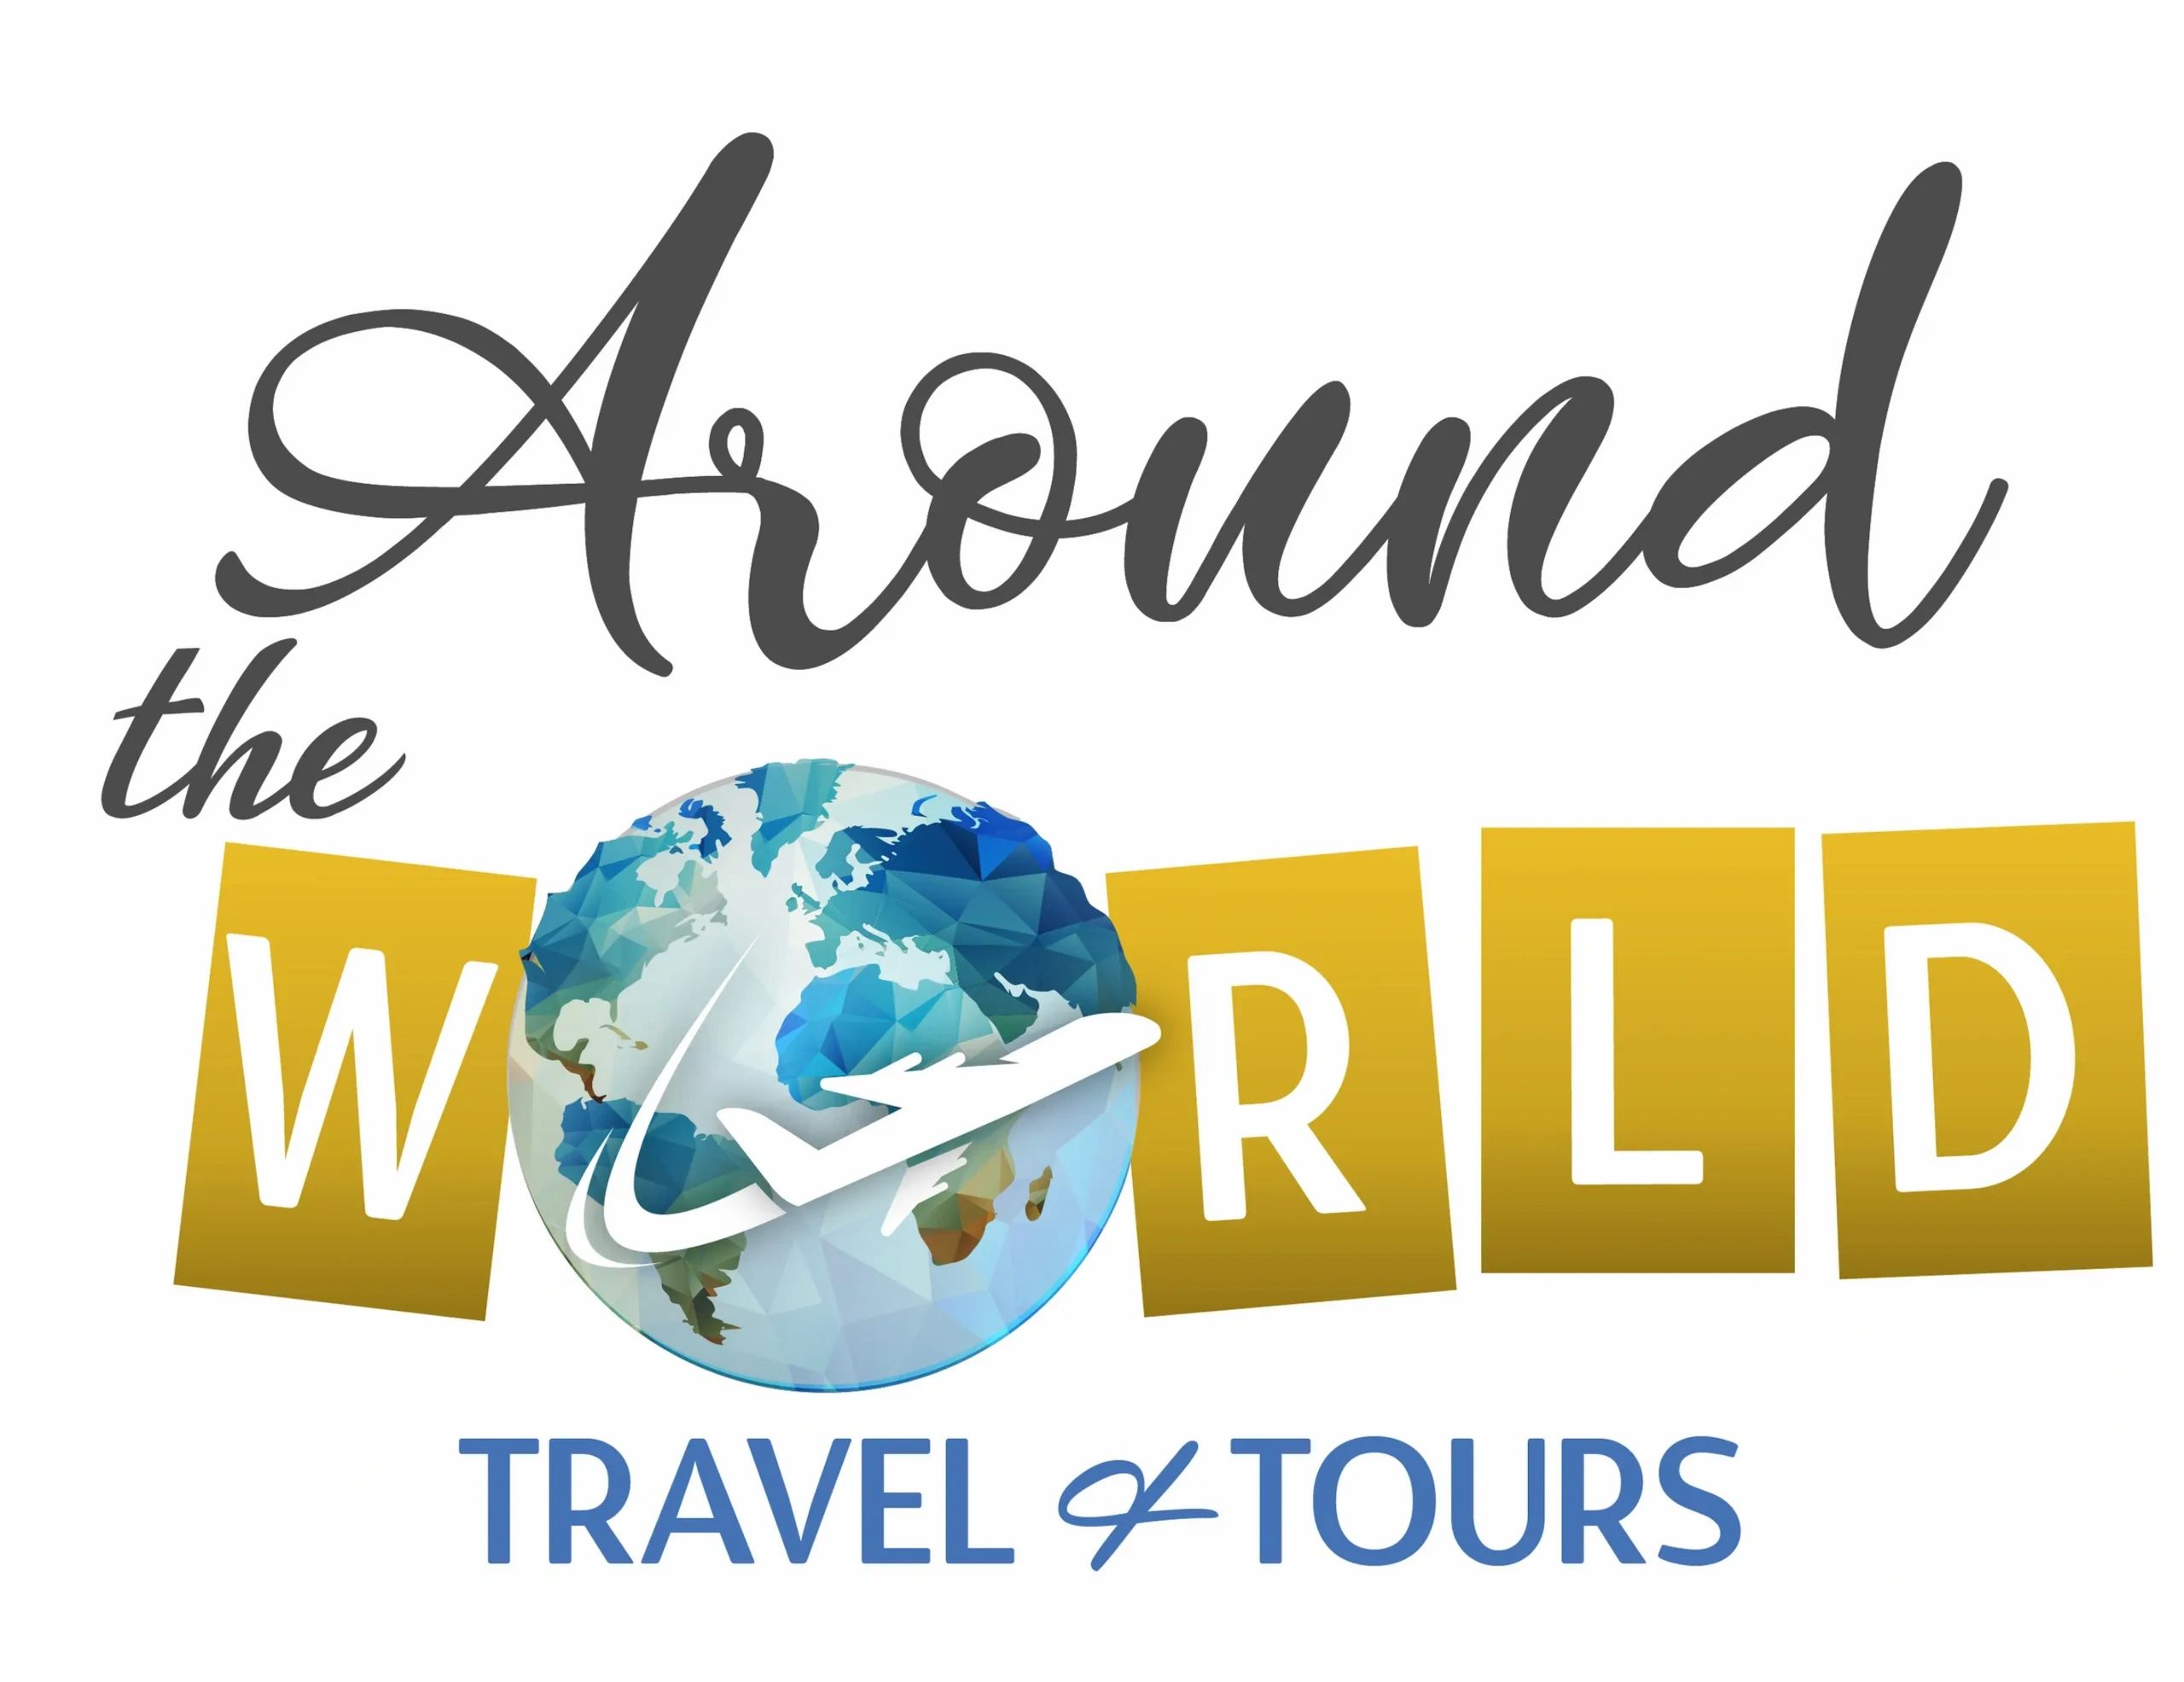 travel around the world pictures